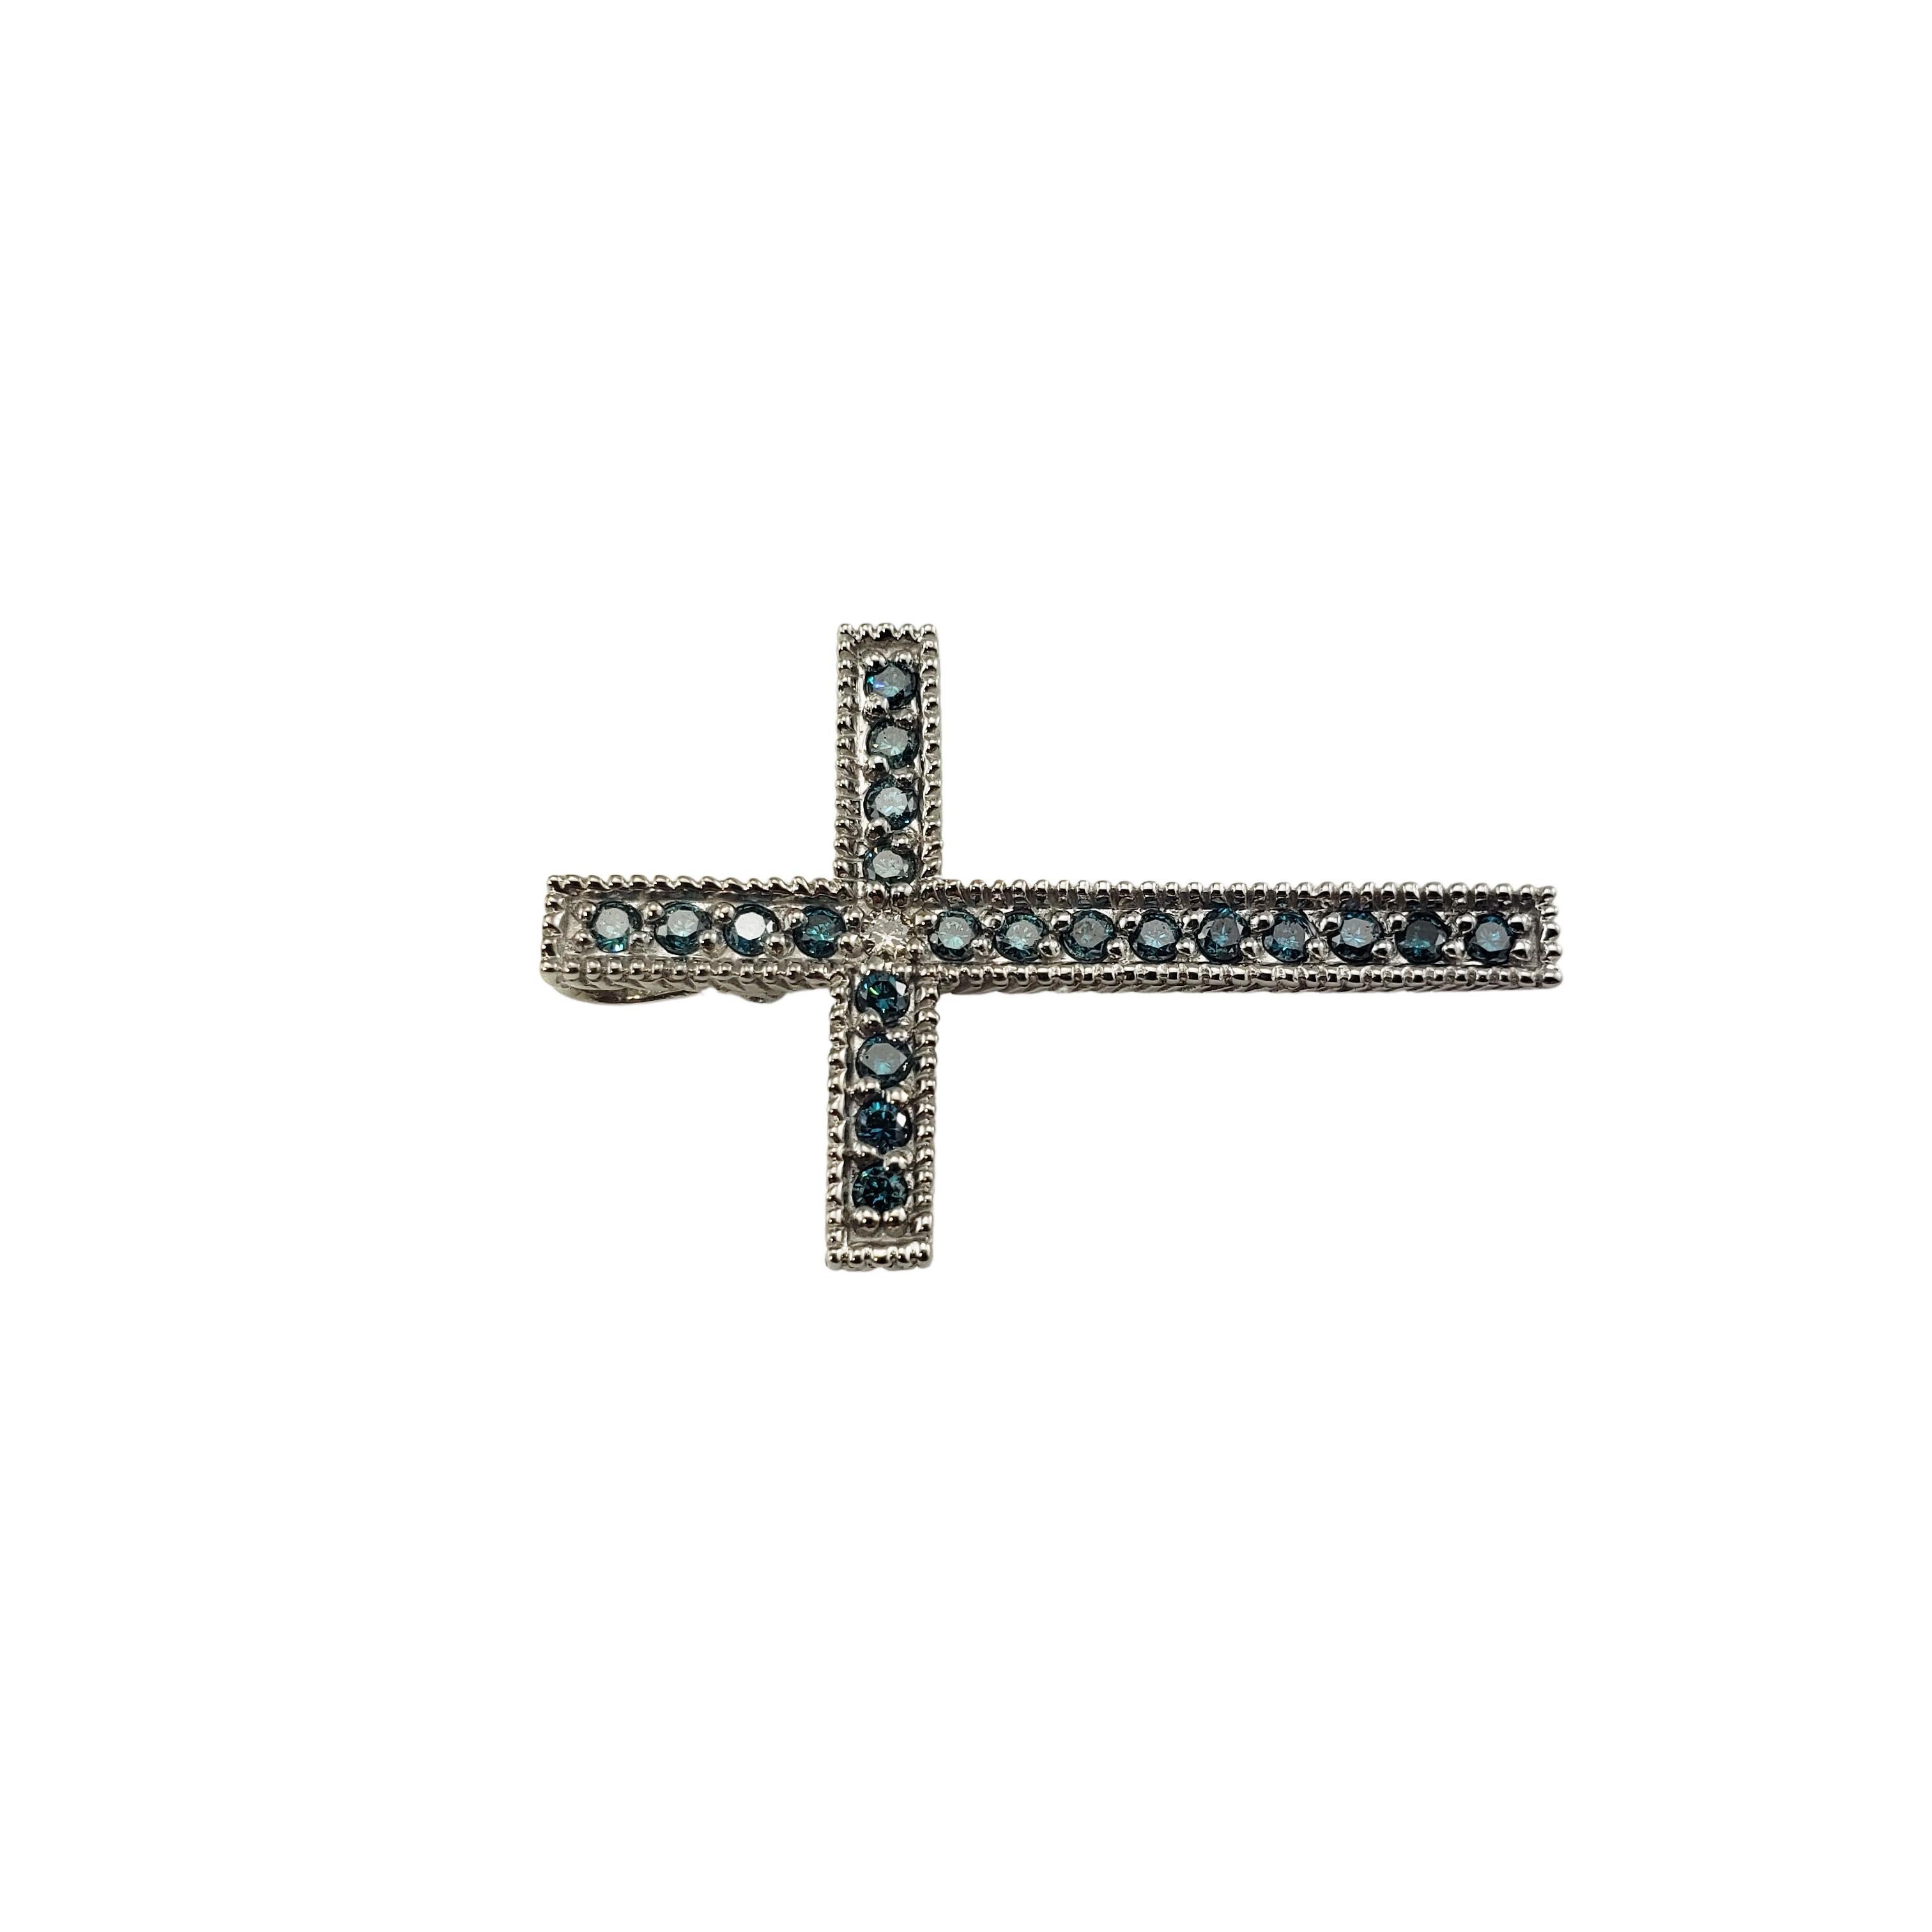 14 Karat White Gold and Blue Treated Diamond Cross Pendant-

This sparkling cross pendant features one white round brilliant cut diamond and 21 blue treated round brilliant cut diamonds set in classic 14K white gold.

Approximate total diamond